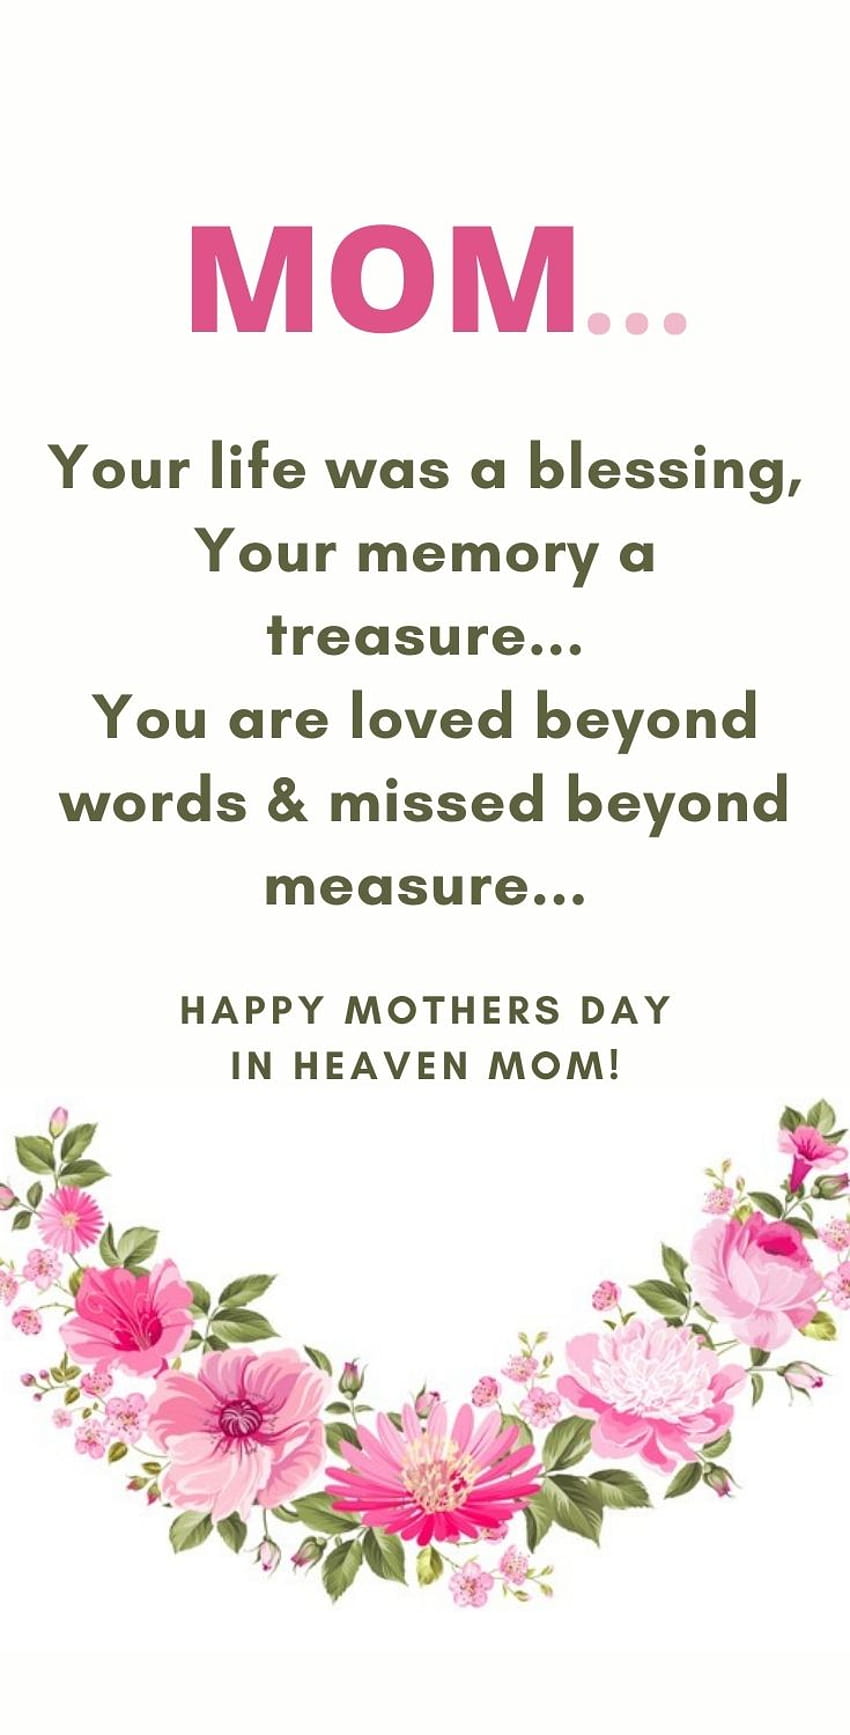 missing mom pictures | Miss you Mom - Wallpaper ~ Mother : God's Best Gift  | Miss you mom, Miss mom, Mom pictures